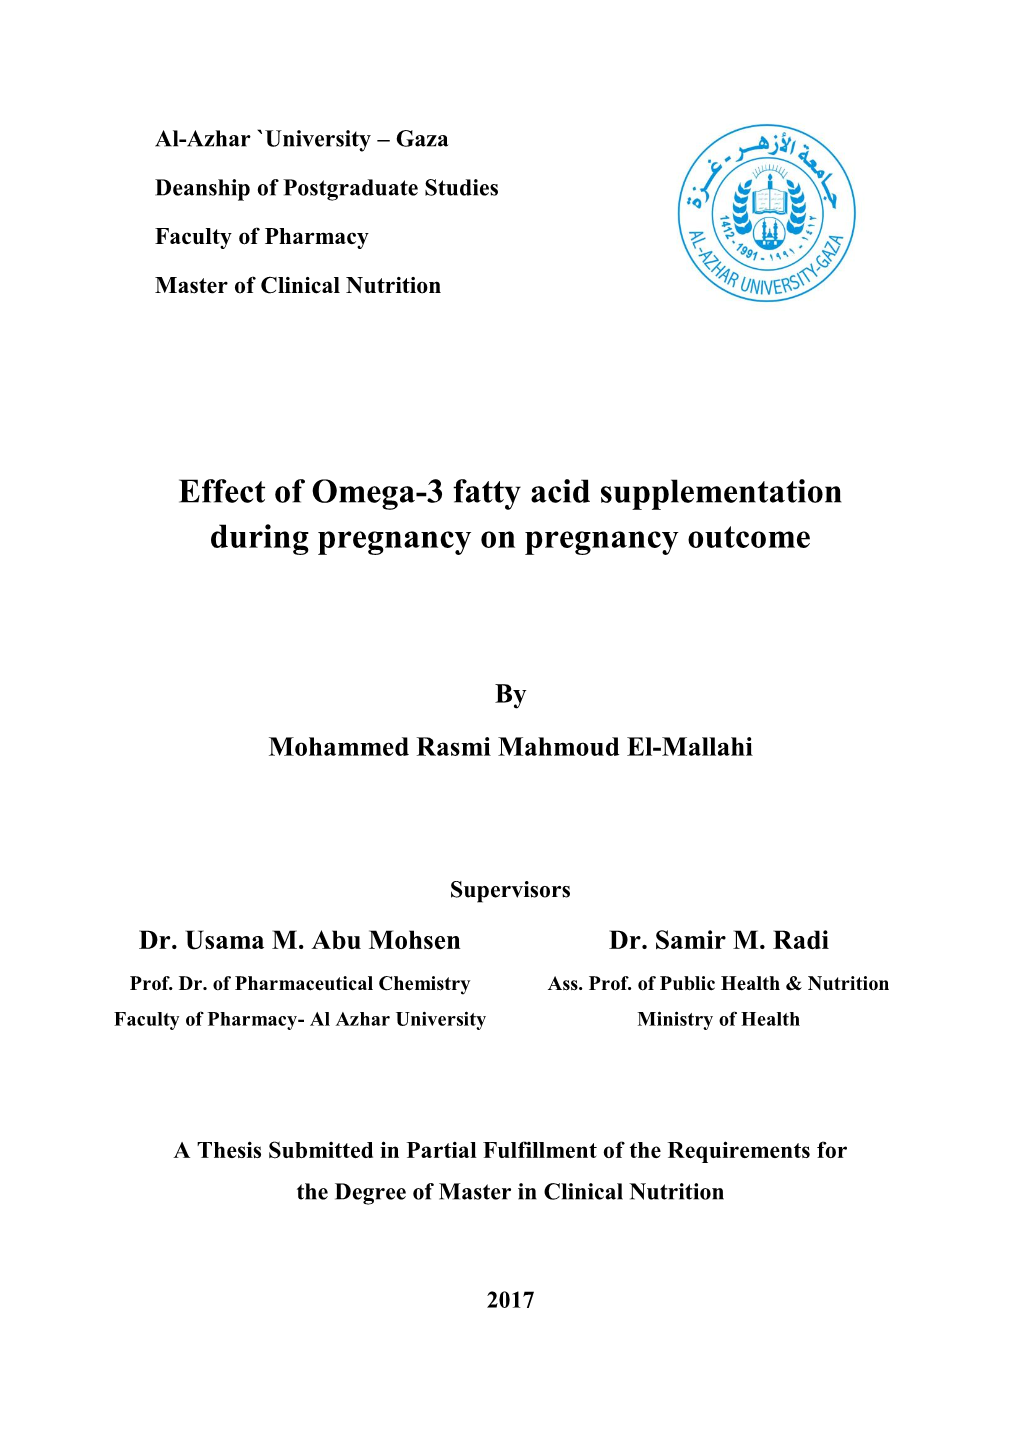 Effect of Omega-3 Fatty Acid Supplementation During Pregnancy on Pregnancy Outcome